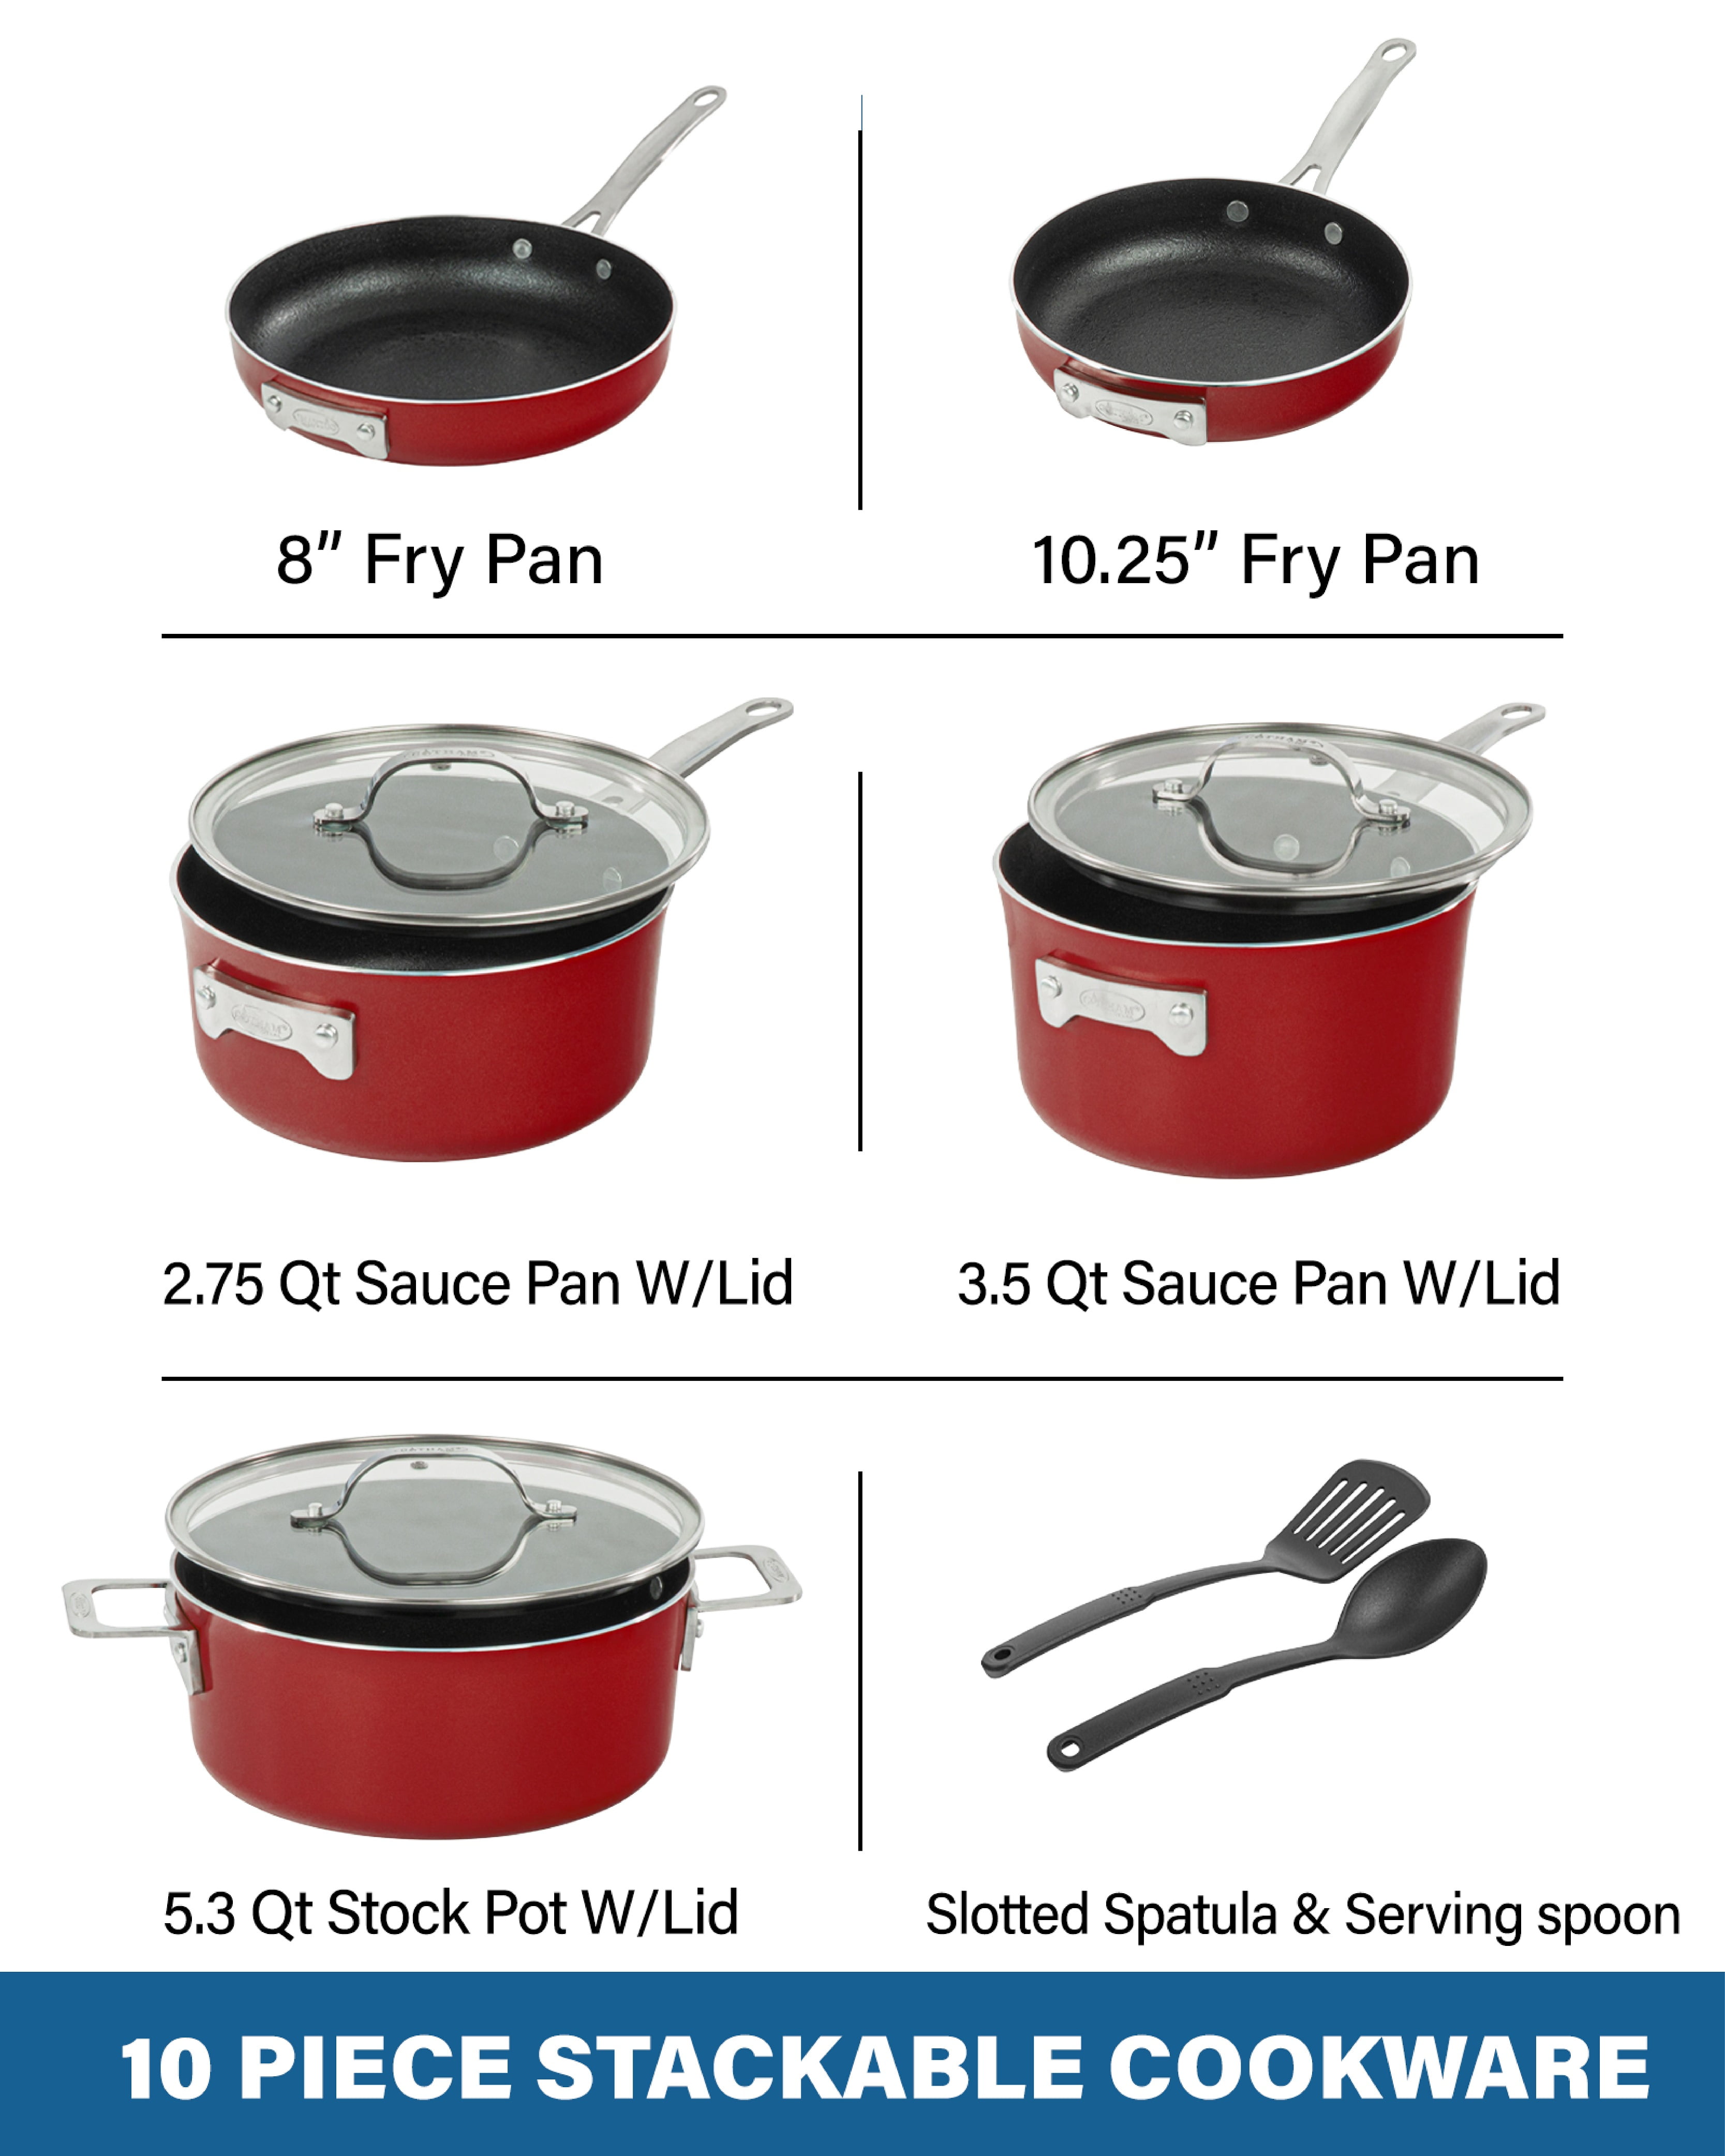  Gotham Steel Stackmaster Pots & Pans Set – Stackable 10 Piece  Cookware Set Saves 30% Space, Ultra Nonstick Cast Texture Coating, Includes  Fry Pans, Saucepans, Stock Pots and More – Dishwasher